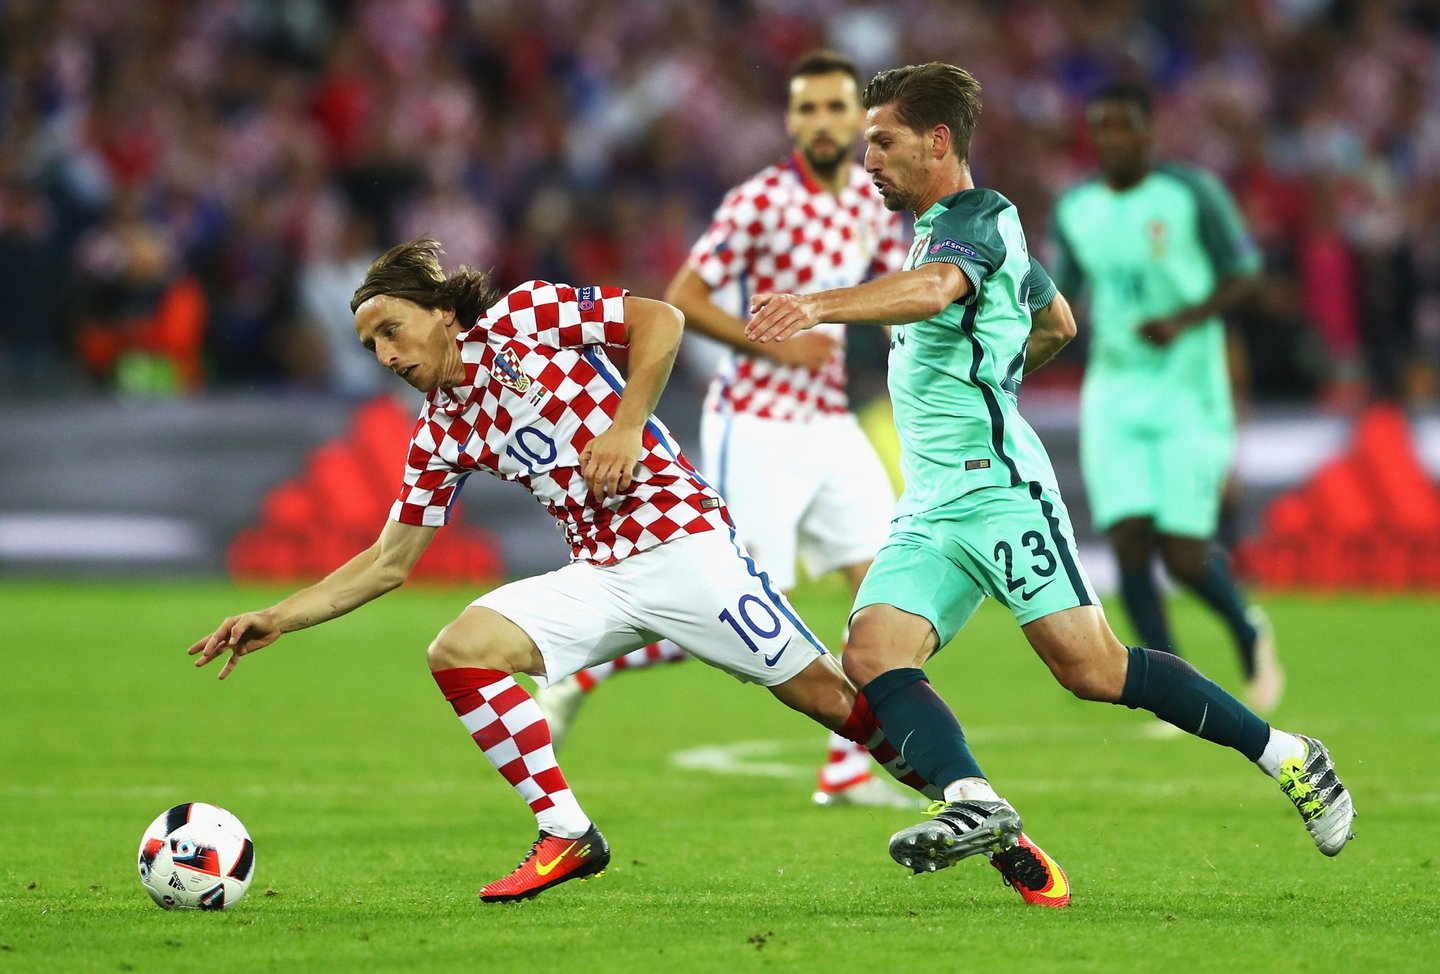 LENS, FRANCE - JUNE 25: Luka Modric of Croatia controls the ball under pressure of Adrien Silva of Portugal during the UEFA EURO 2016 round of 16 match between Croatia and Portugal at Stade Bollaert-Delelis on June 25, 2016 in Lens, France. (Photo by Clive Mason/Getty Images)